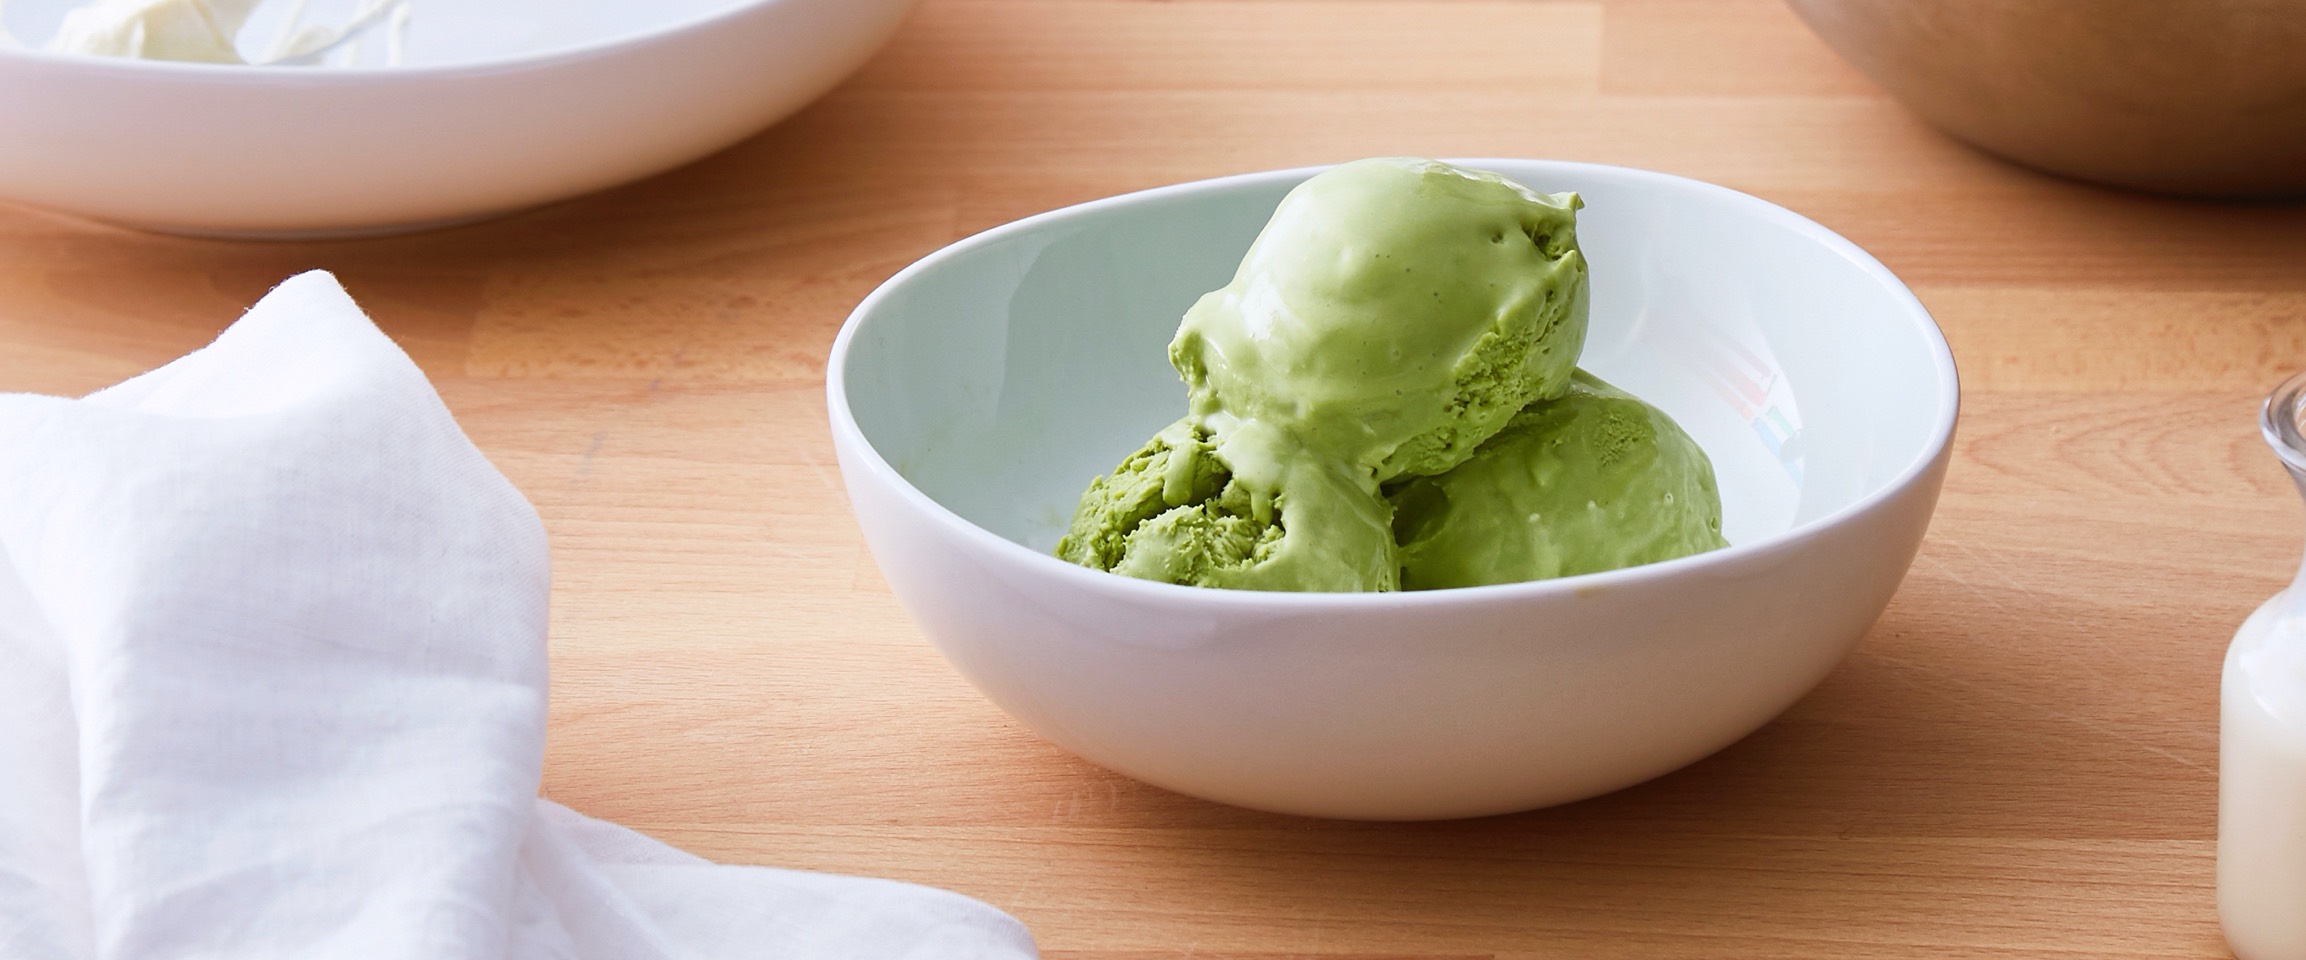 Matcha ice cream in a white bowl.